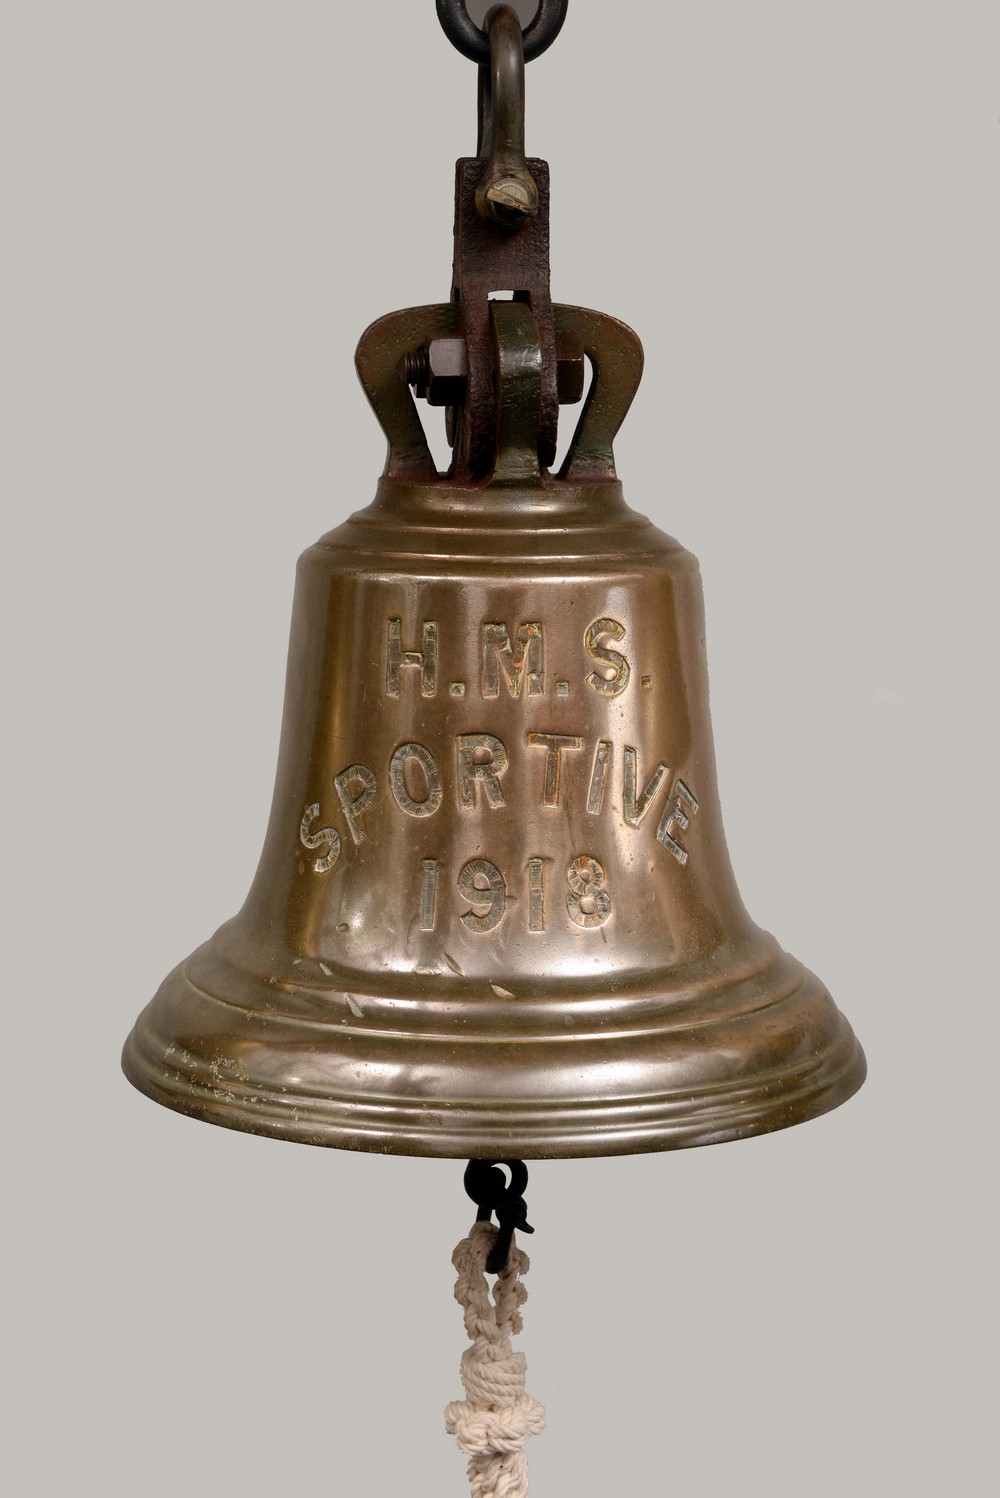 Bell - Bell - Ships bell, H.M.S. - Image 2 of 2